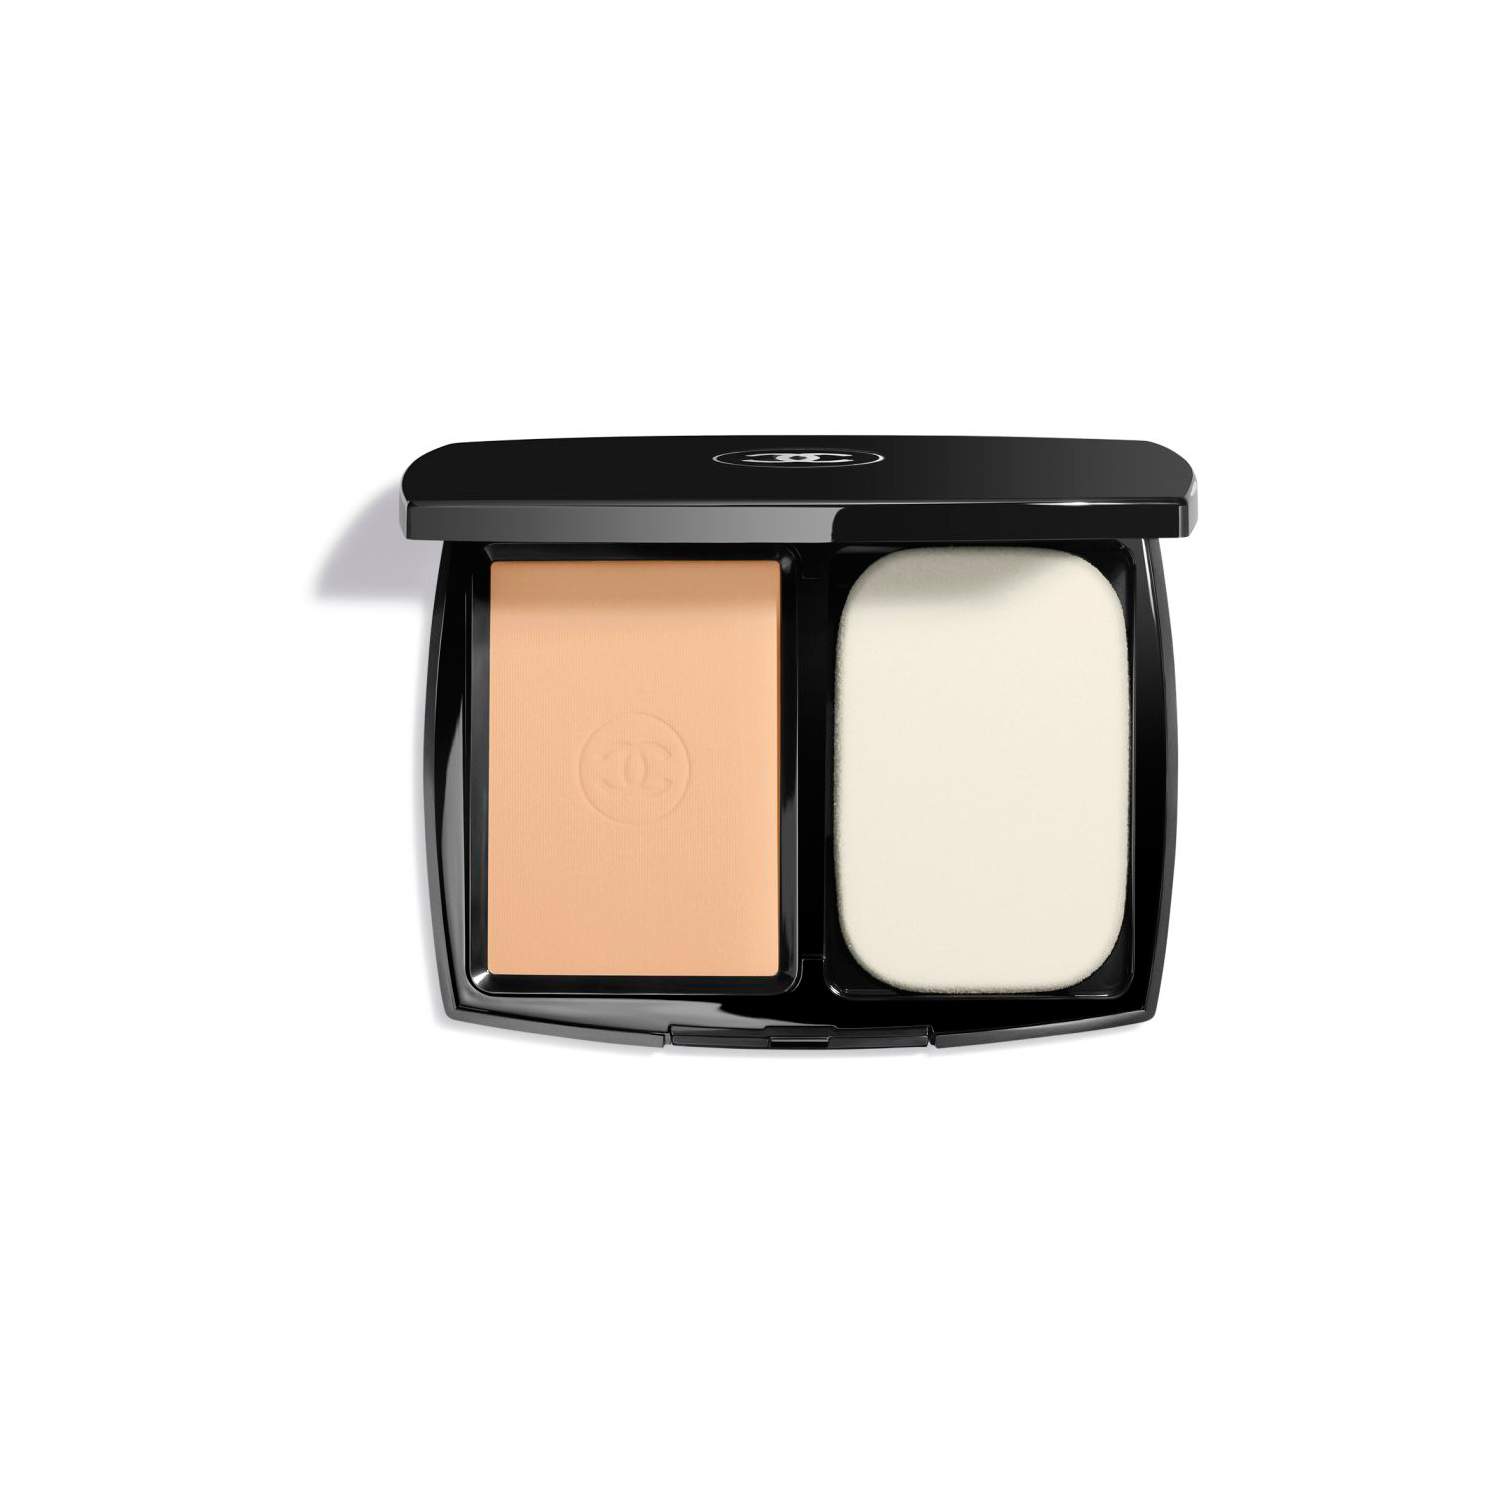 CHANEL ULTRA LE TEINT ULTRAWEAR – ALL–DAY COMFORT FLAWLESS FINISH COMPACT FOUNDATION